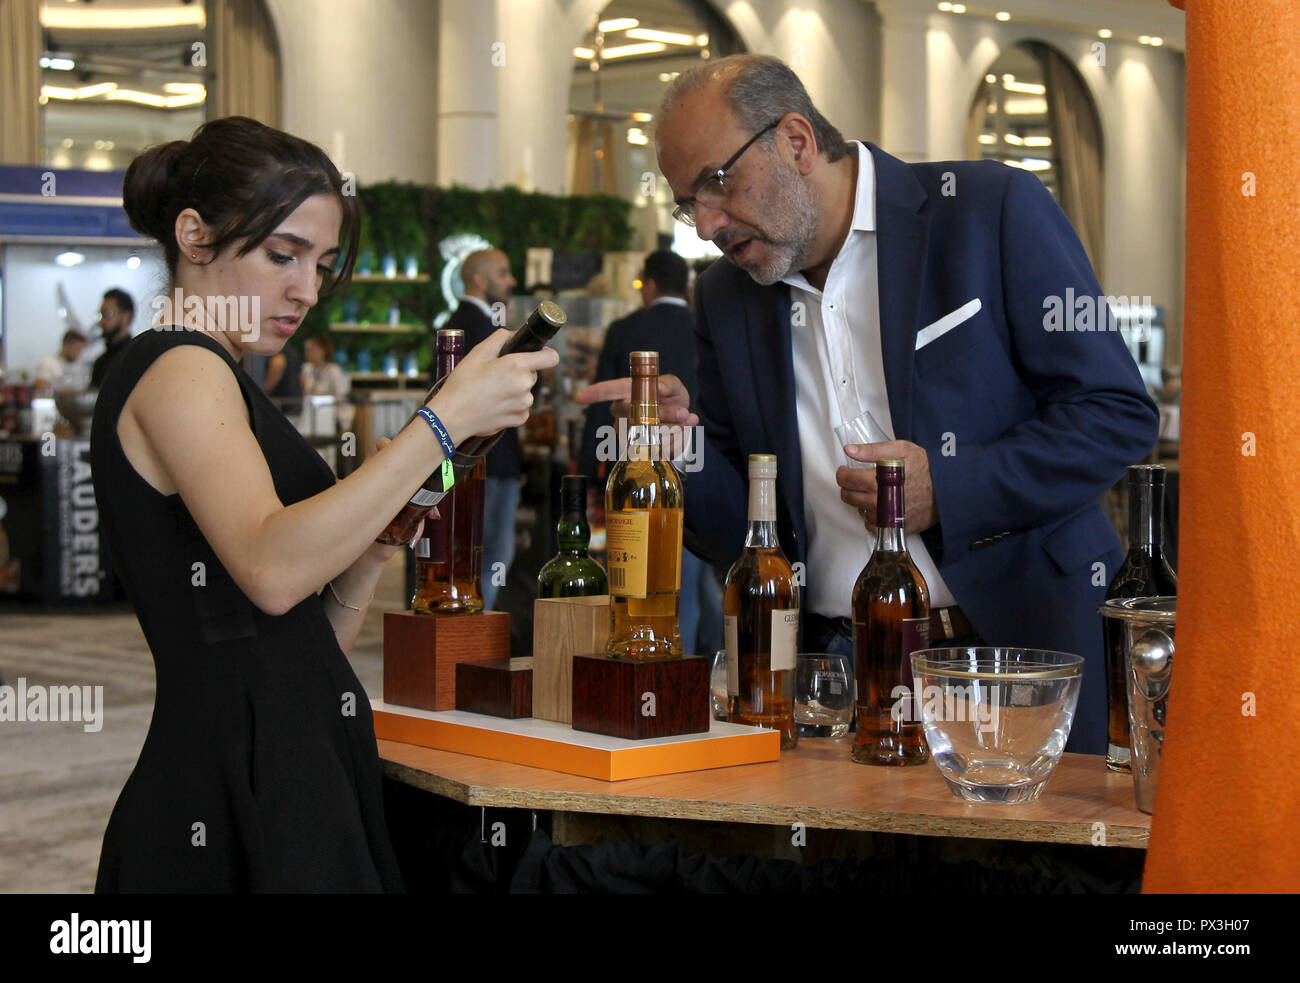 Beirut, Lebanon. 18th Oct, 2018. A visitor talks to a worker during the 3rd edition of Whisky Live Beirut, in Beirut, Lebanon, on Oct. 18, 2018. The 3rd edition of Whisky Live Beirut opened on Thursday. More than 60 international whisky brands display their products to the public during the three-day event. Credit: Bilal Jawich/Xinhua/Alamy Live News Stock Photo